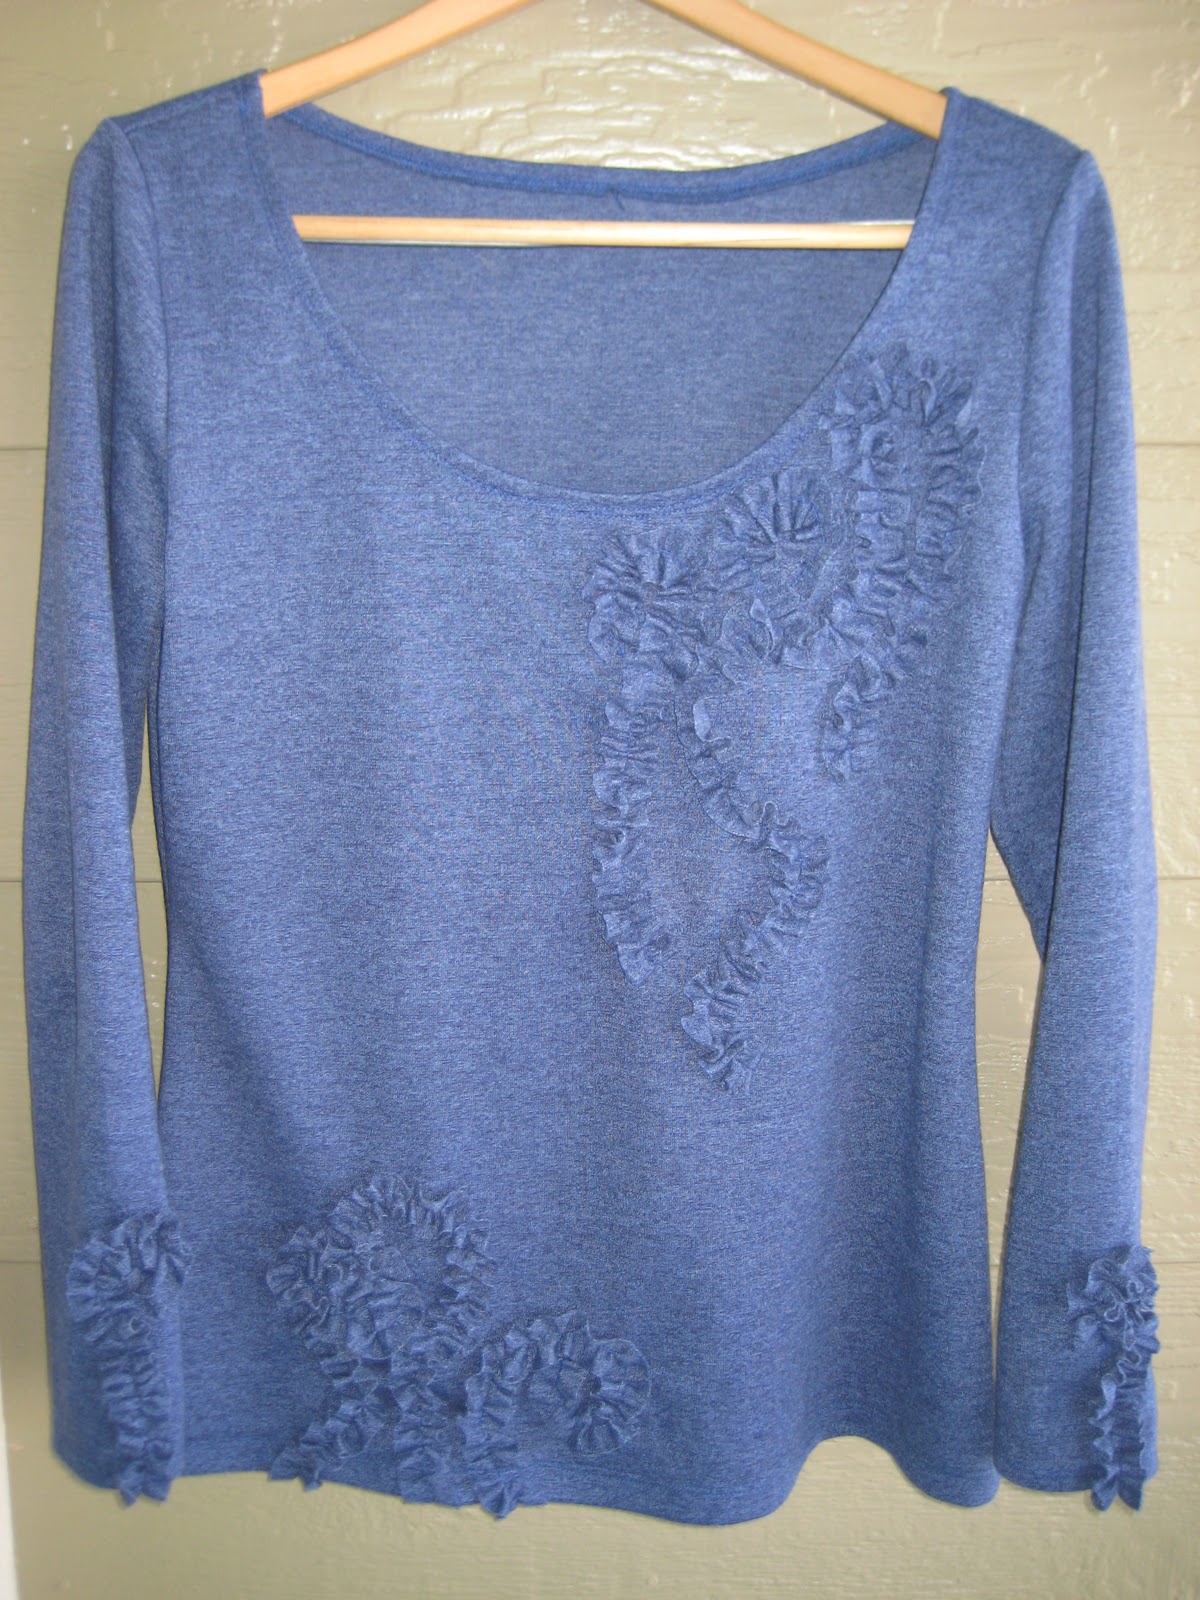 Leslie's Latest Creations: Friday Fashions #4, Embellished Blue Tee